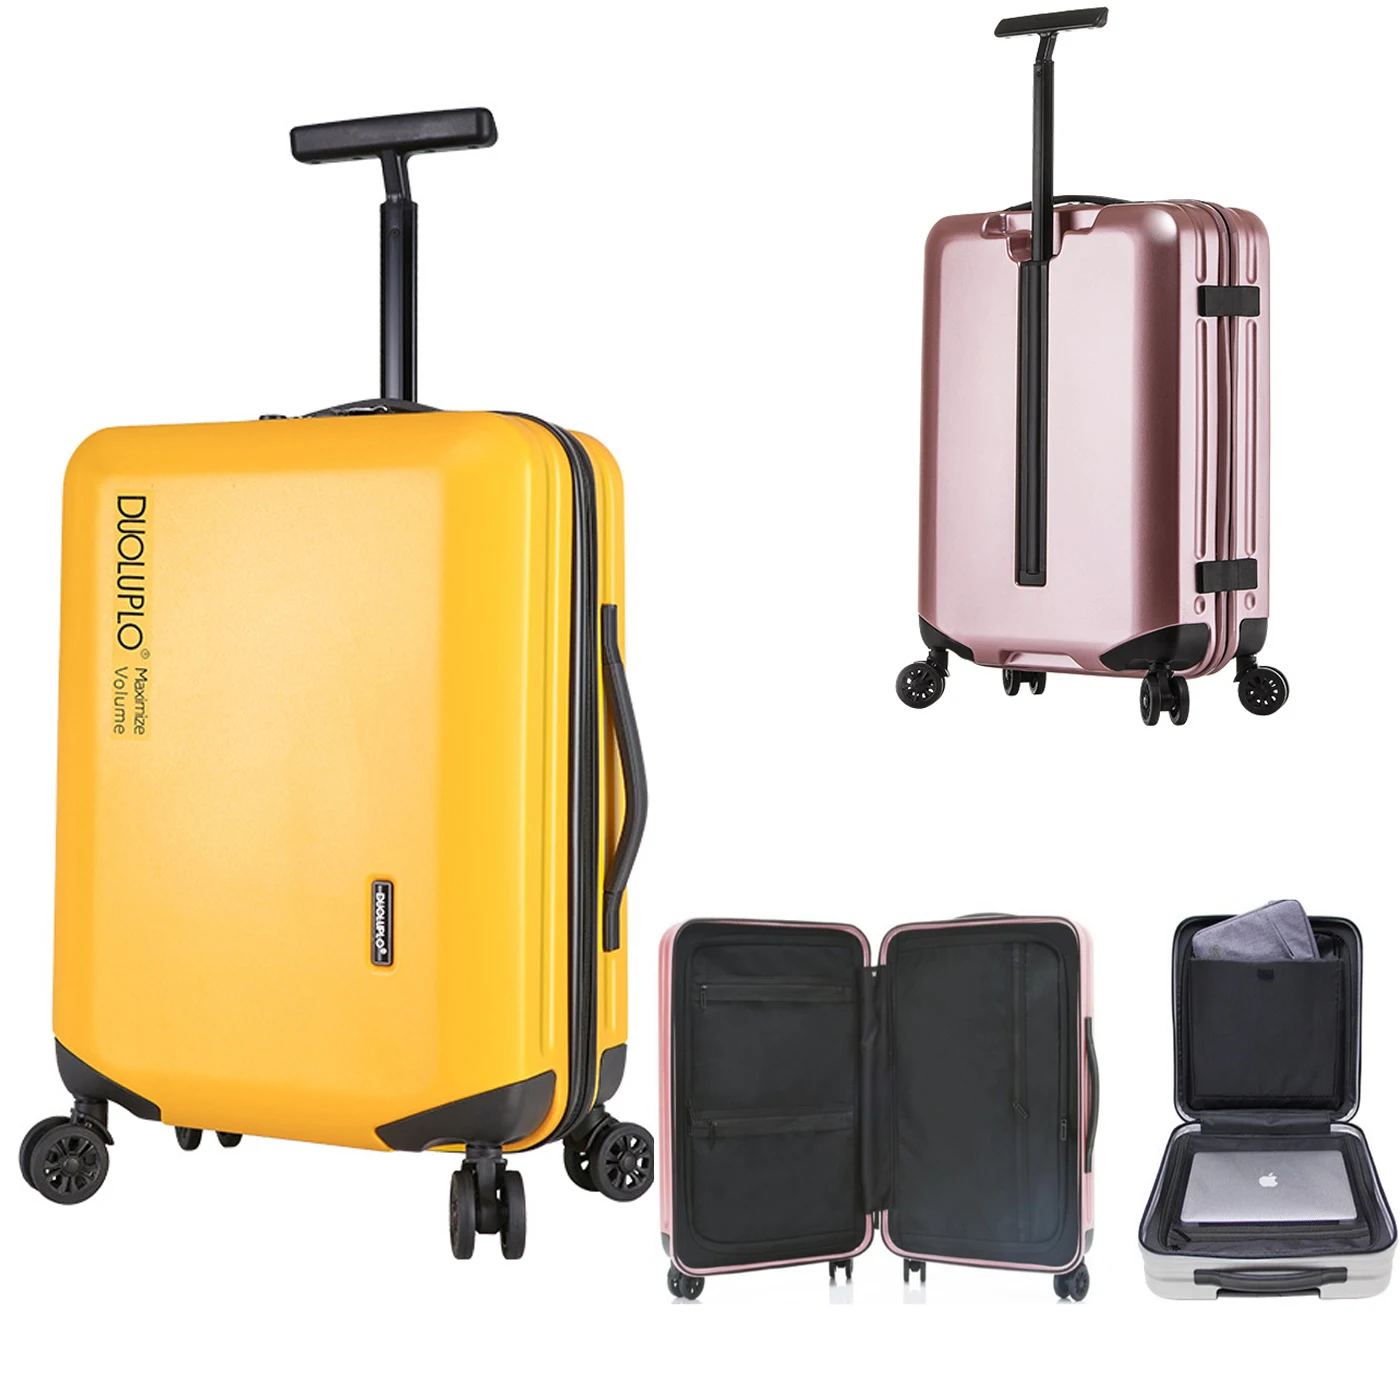 

18"20"22"24"26"28Inch Trolley Rolling Luggage Big Travel Suitcase With Wheels TSA Lock Check-in Case Bagage Valise Free Shipping